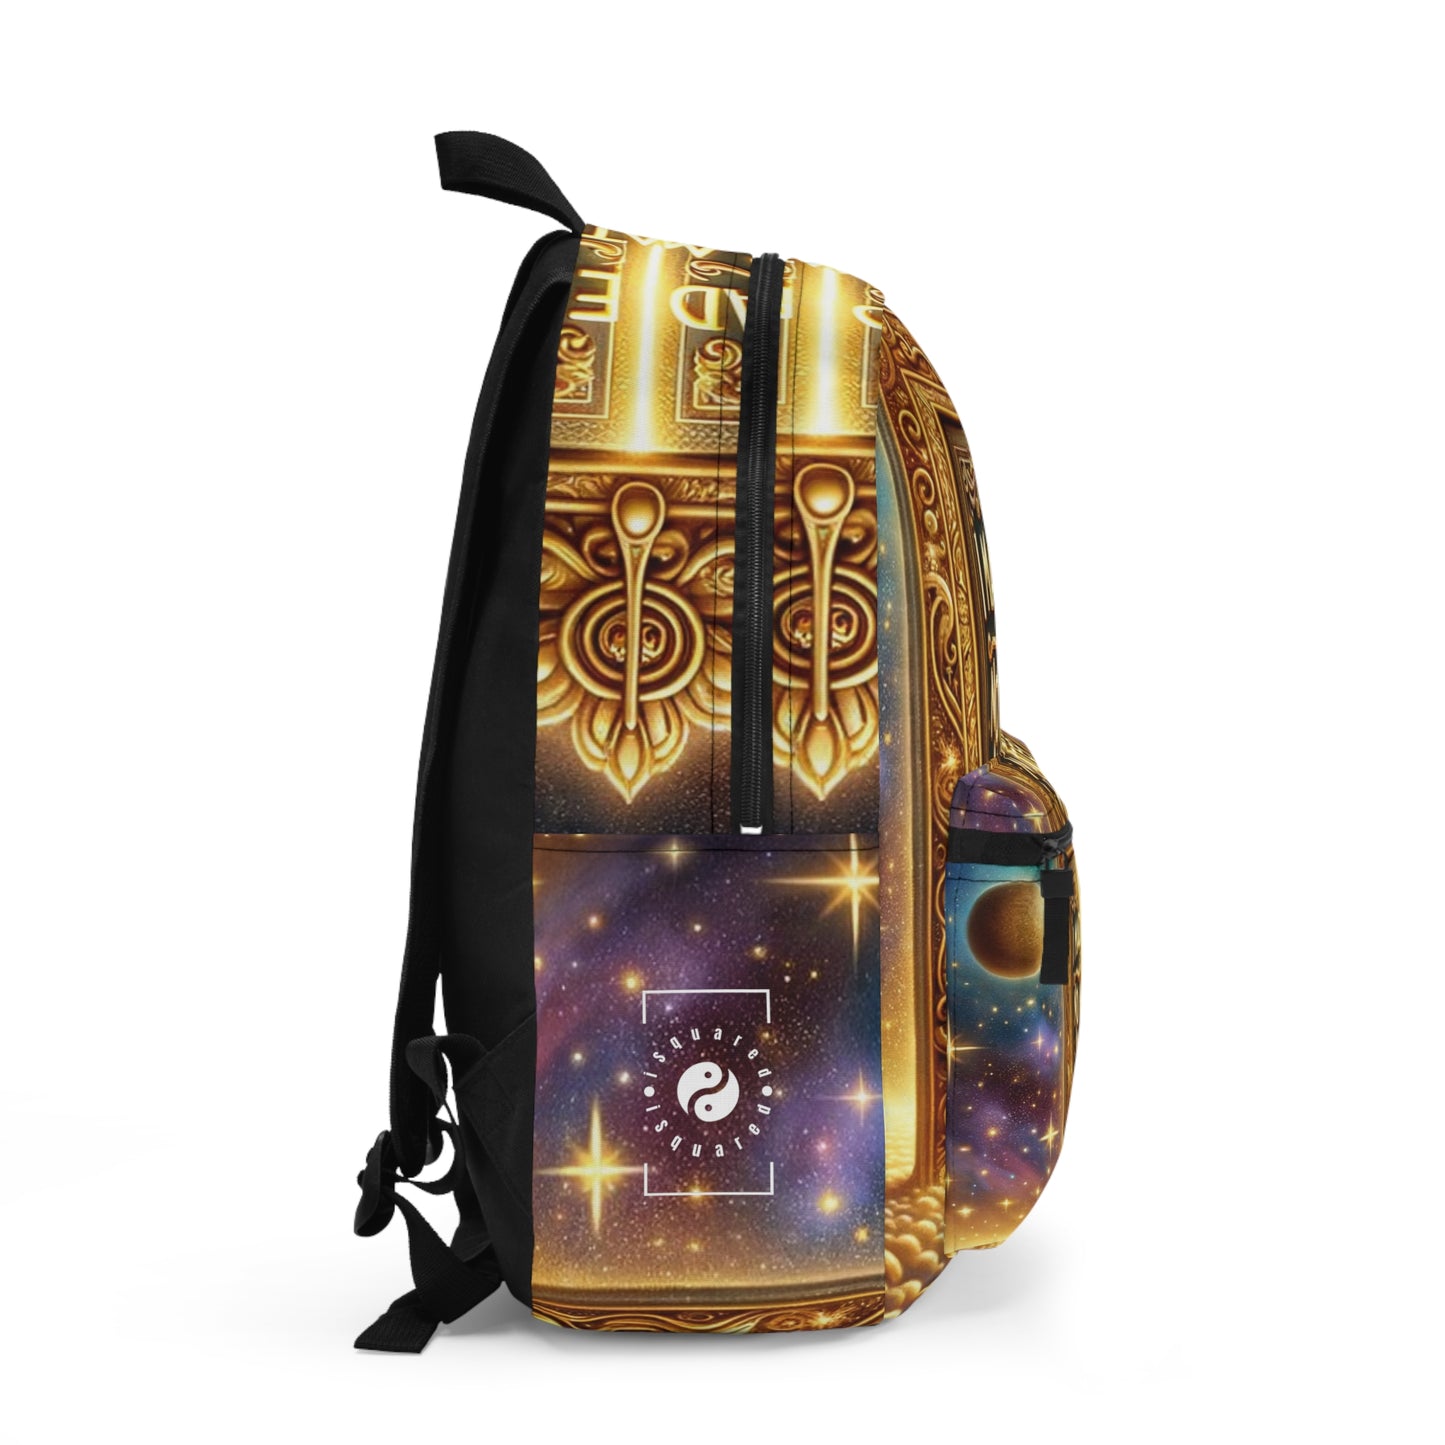 "Threshold of Perseverance" - Backpack